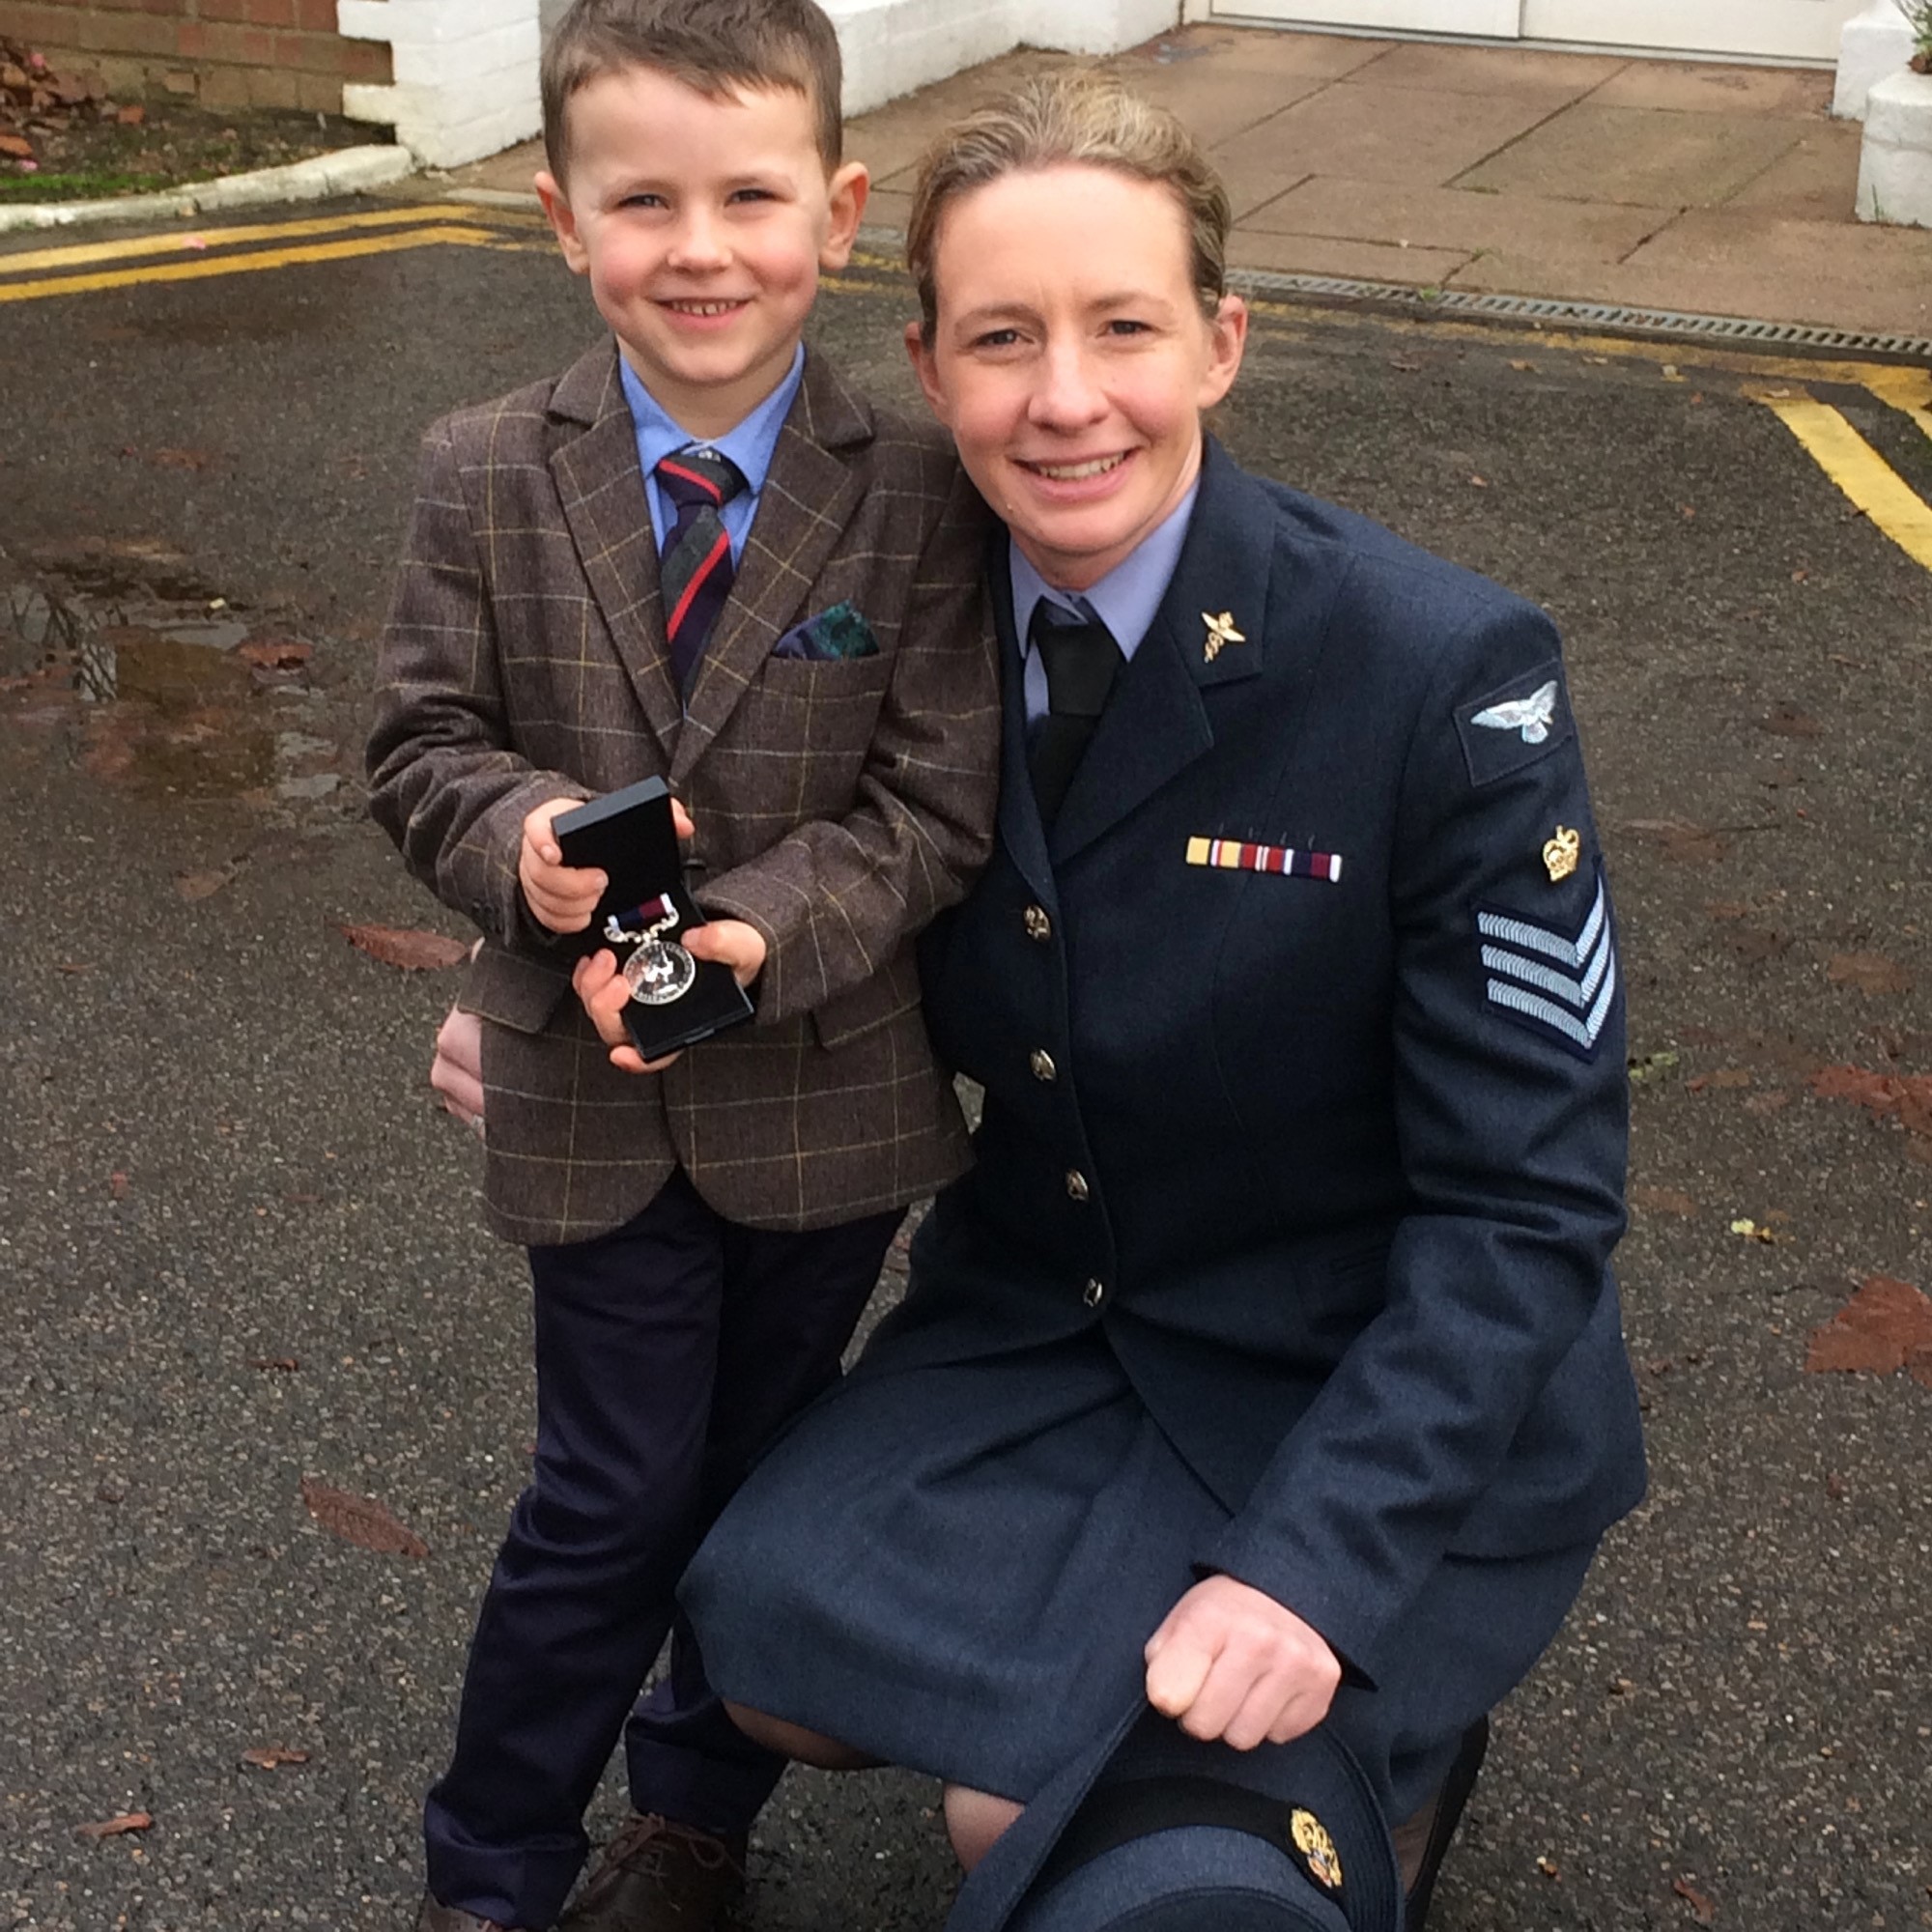 Image shows RAF aviator smiling with her son, who is holding her medal.